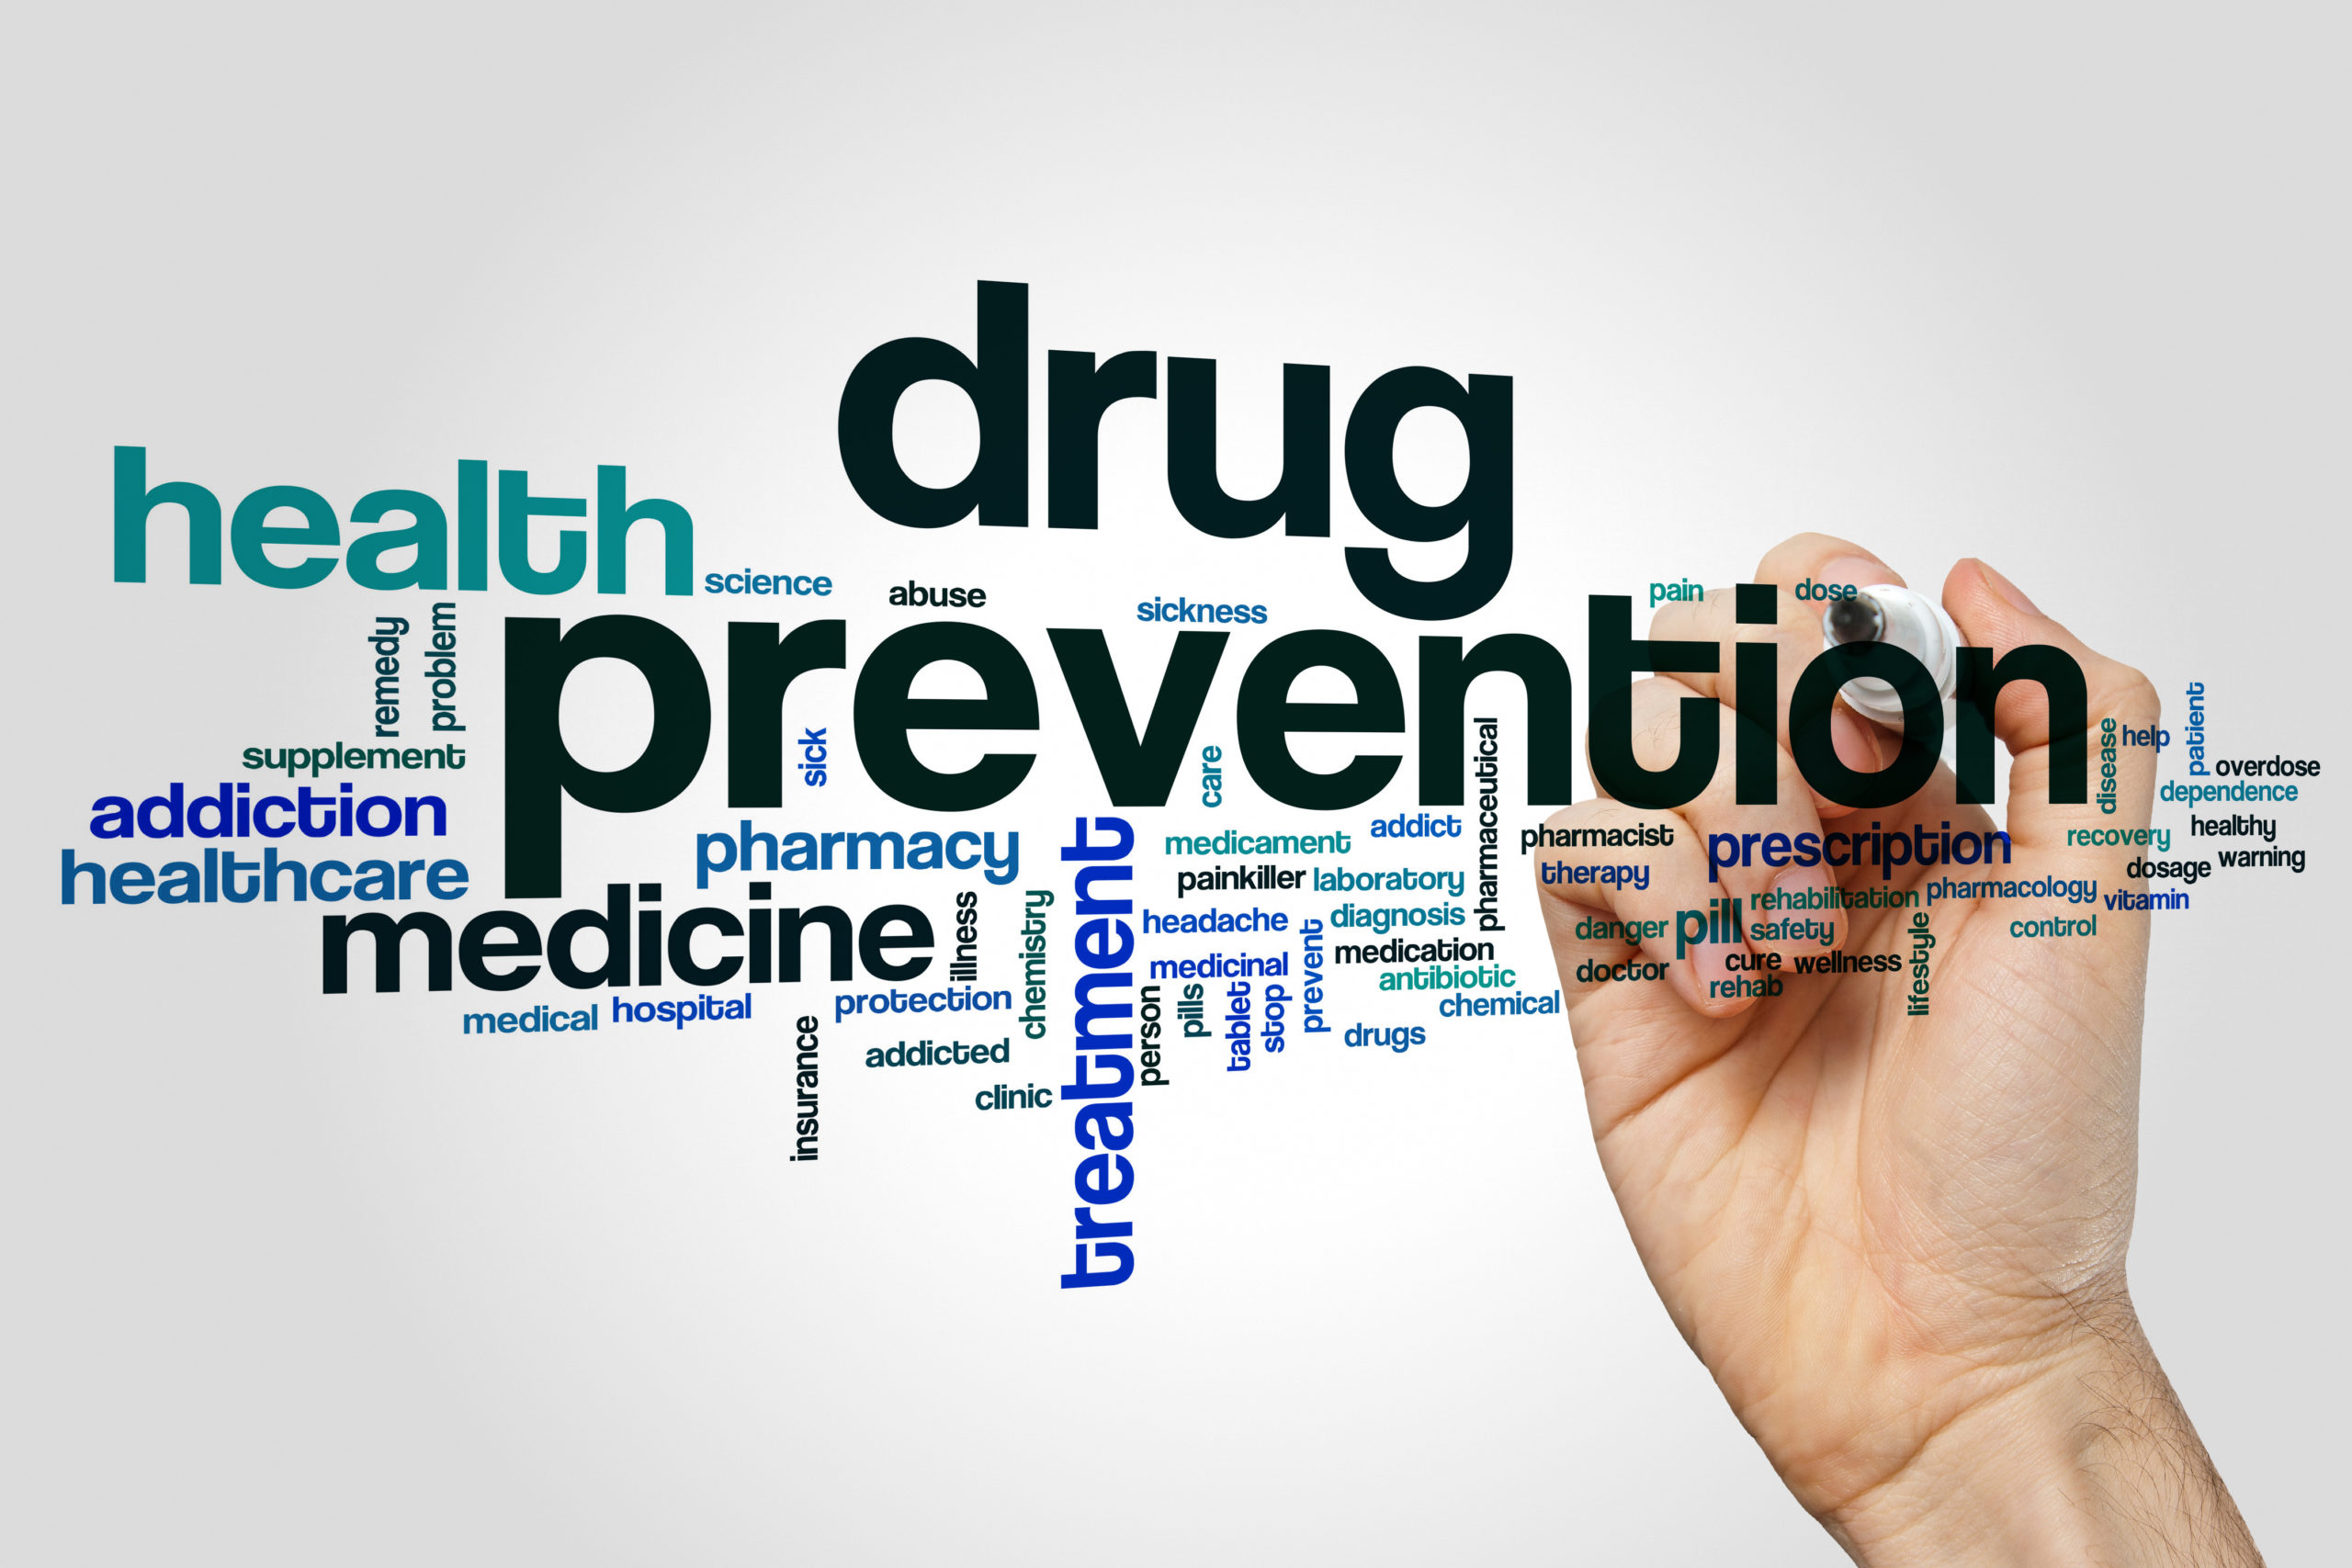 Drug-poisoning prevention services for construction workers